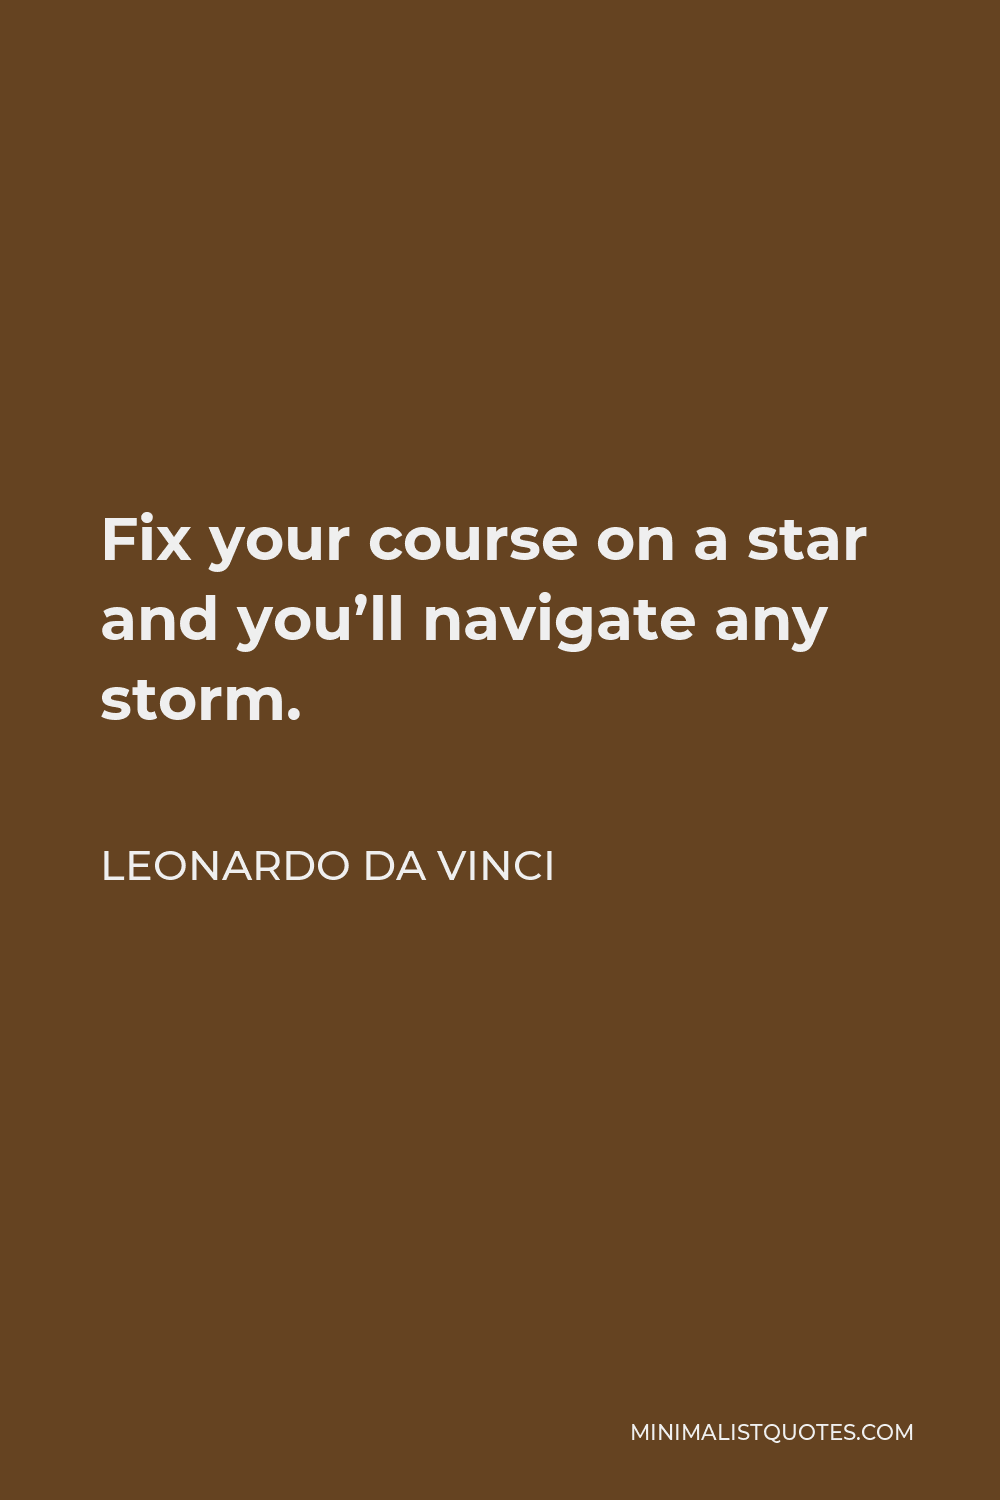 Leonardo da Vinci Quote - Fix your course on a star and you’ll navigate any storm.